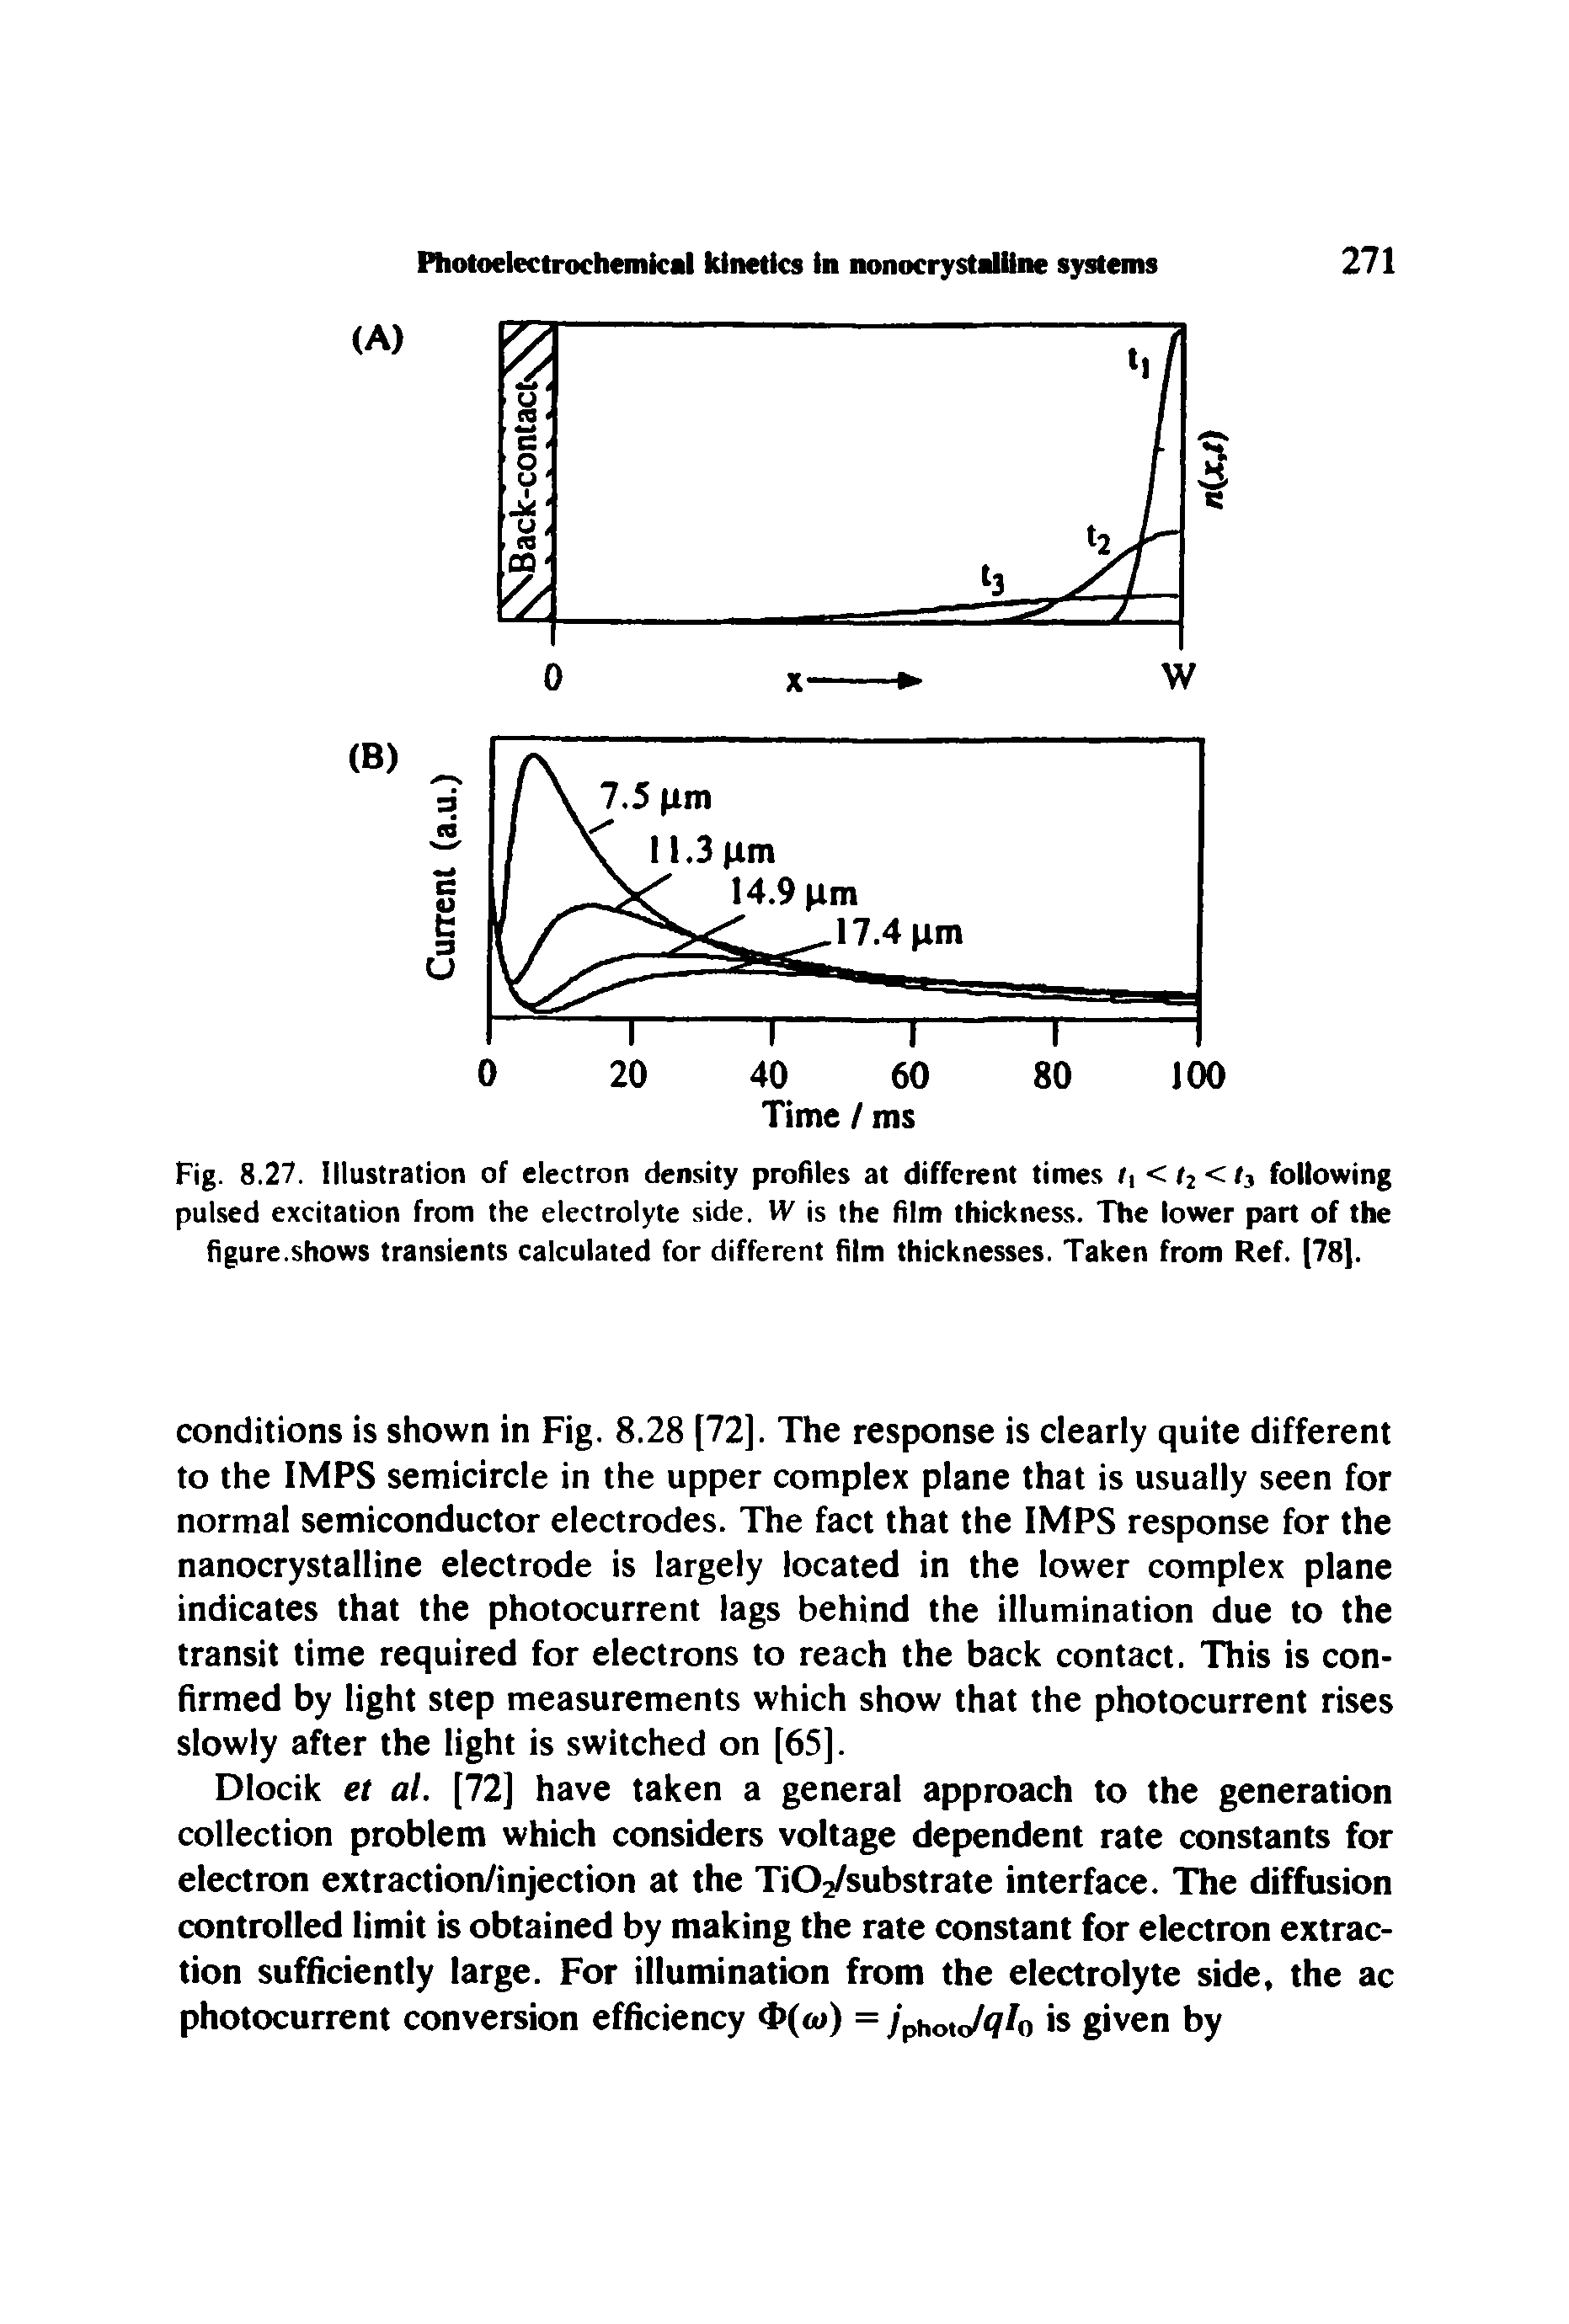 Fig. 8.27. Illustration of electron density profiles at different times /t c /2 c /3 following pulsed excitation from the electrolyte side. W is the film thickness. The lower part of the figure.shows transients calculated for different film thicknesses. Taken from Ref. [78].